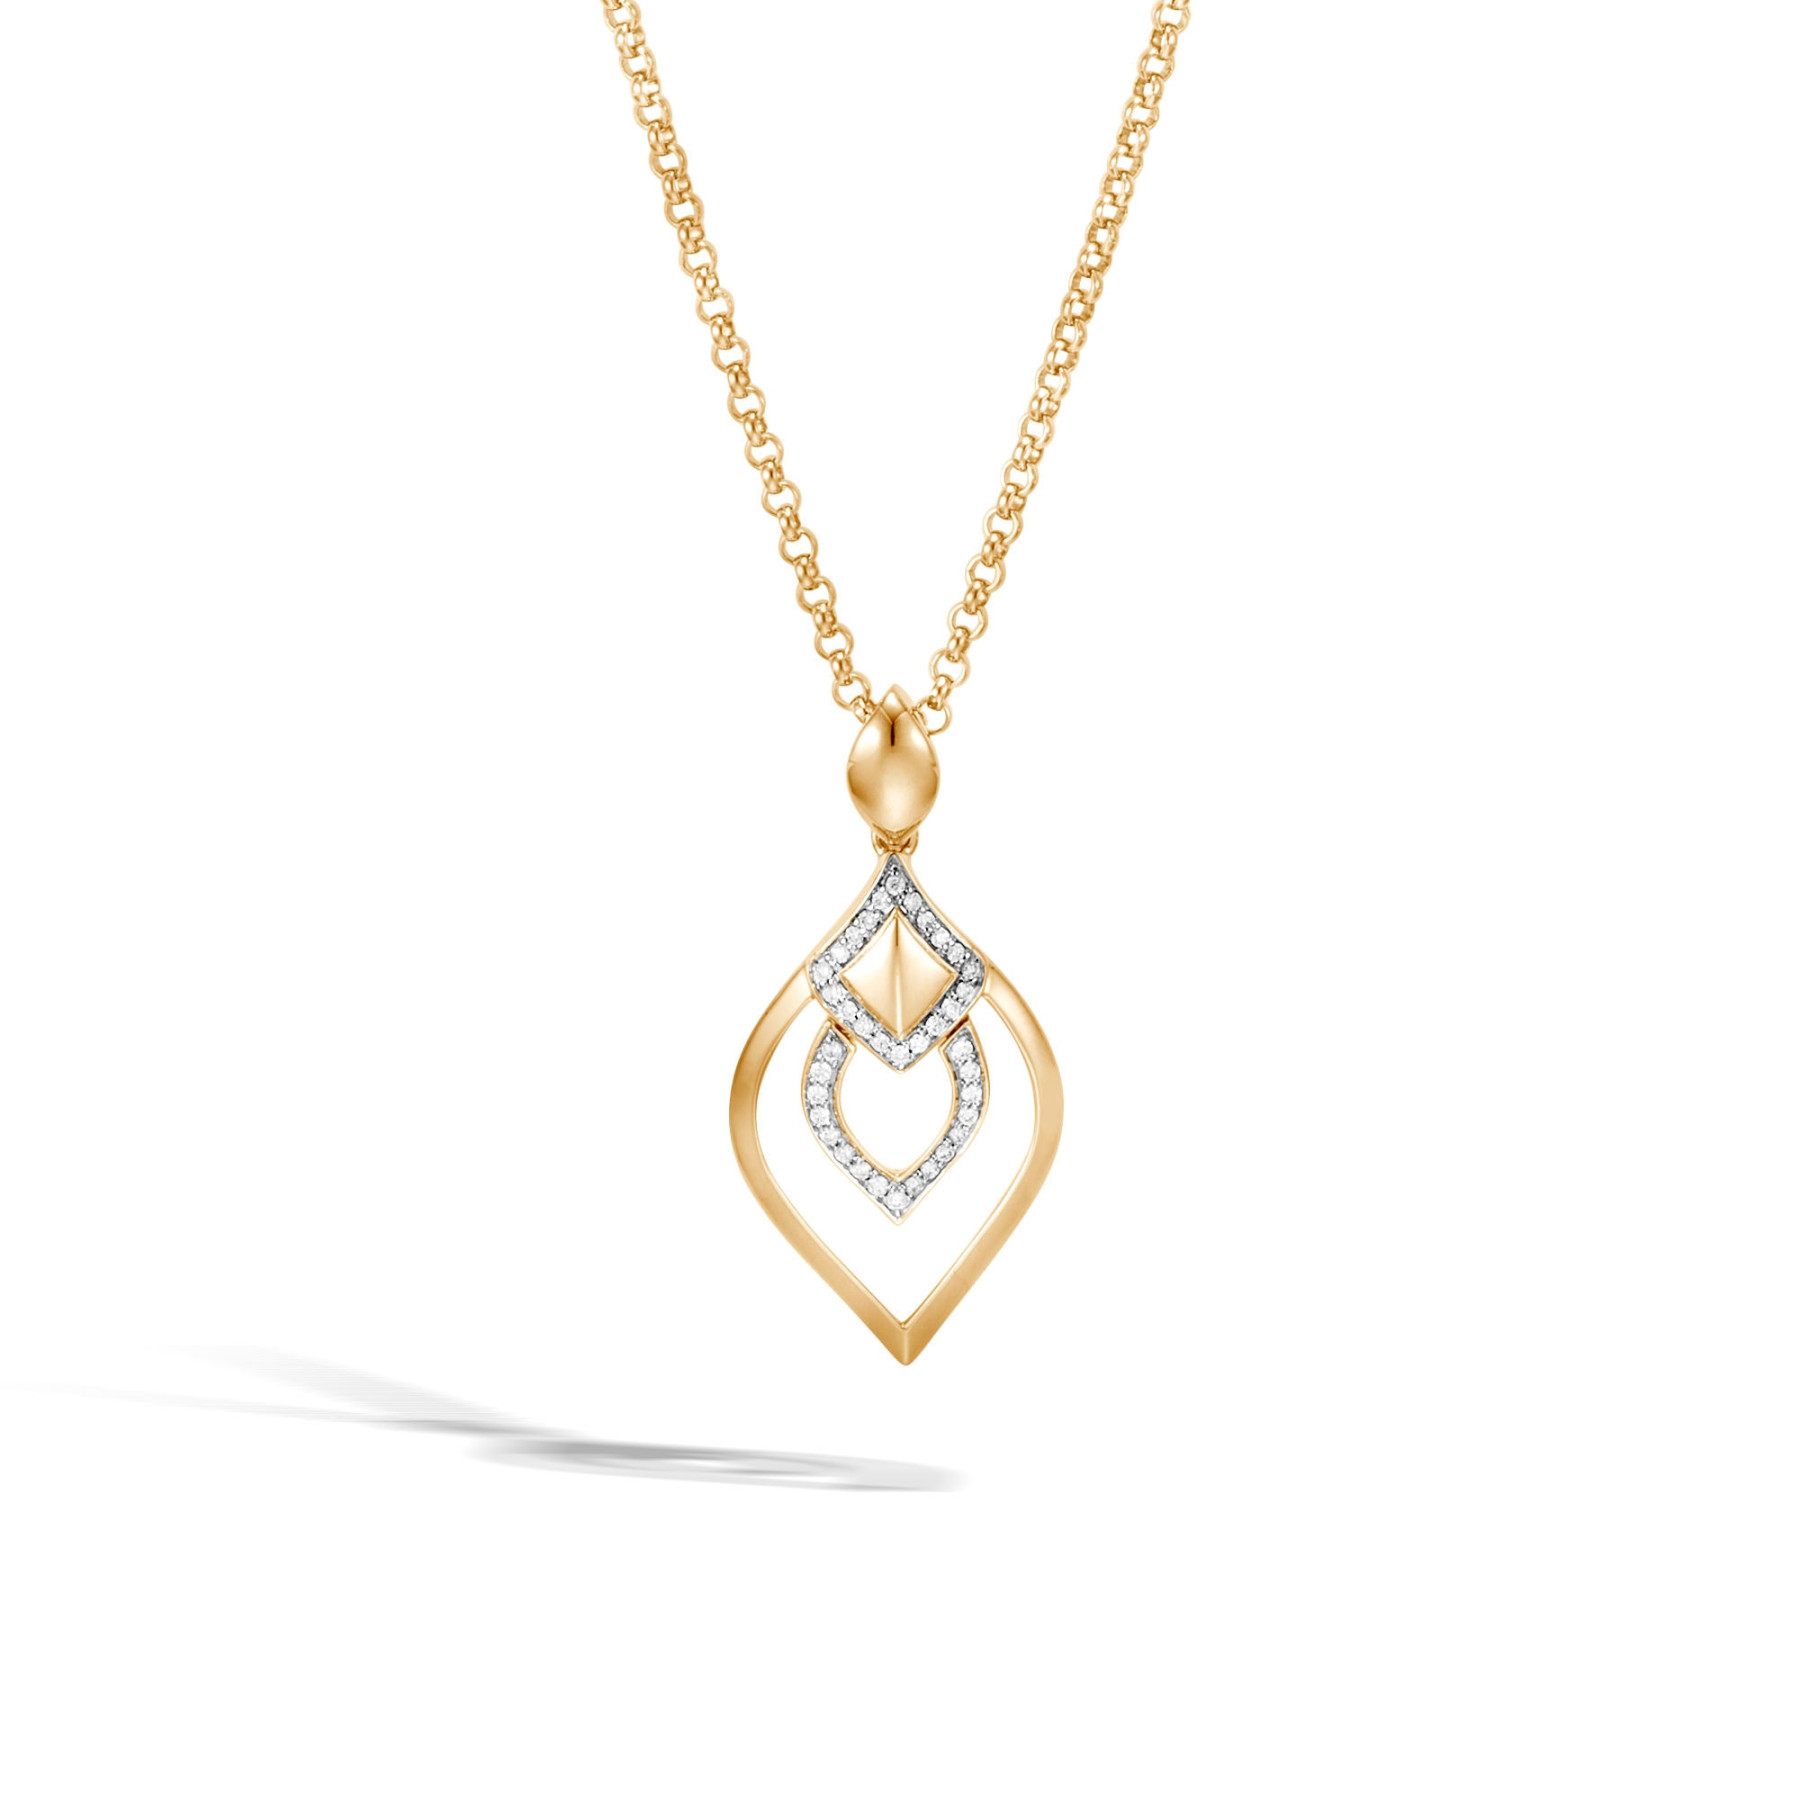 John Hardy Legends Naga Diamond Pendant Necklace in 18k Yellow Gold front view